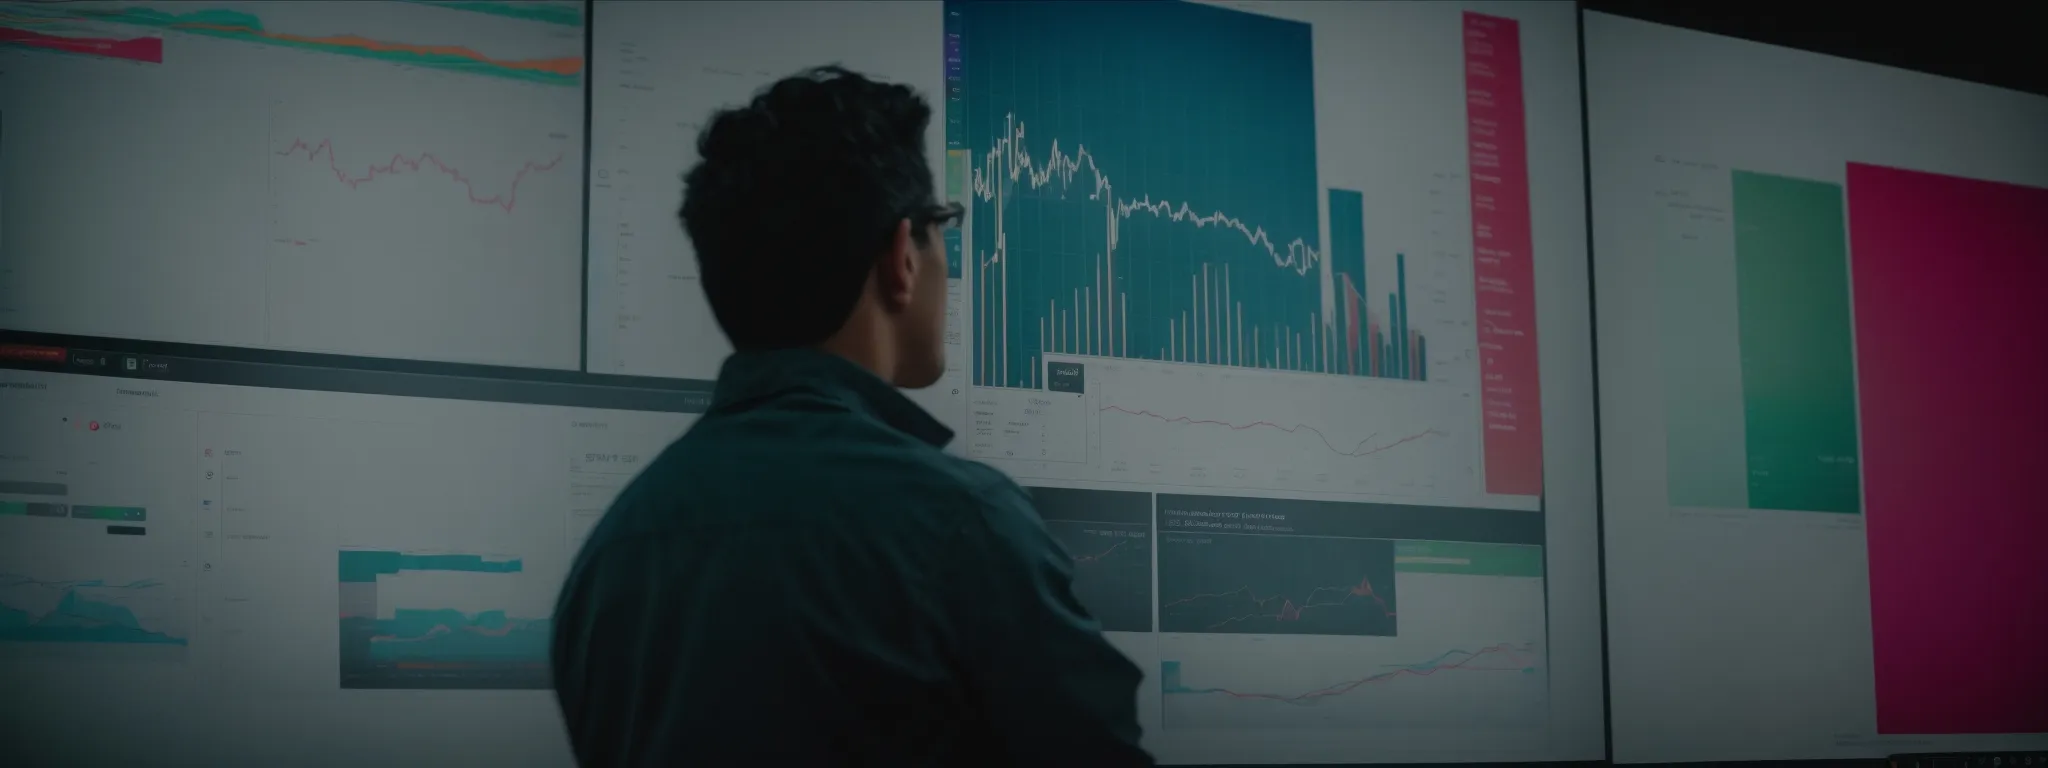 a marketer intently scrutinizes a screen displaying colorful graphs and keyword analytics.